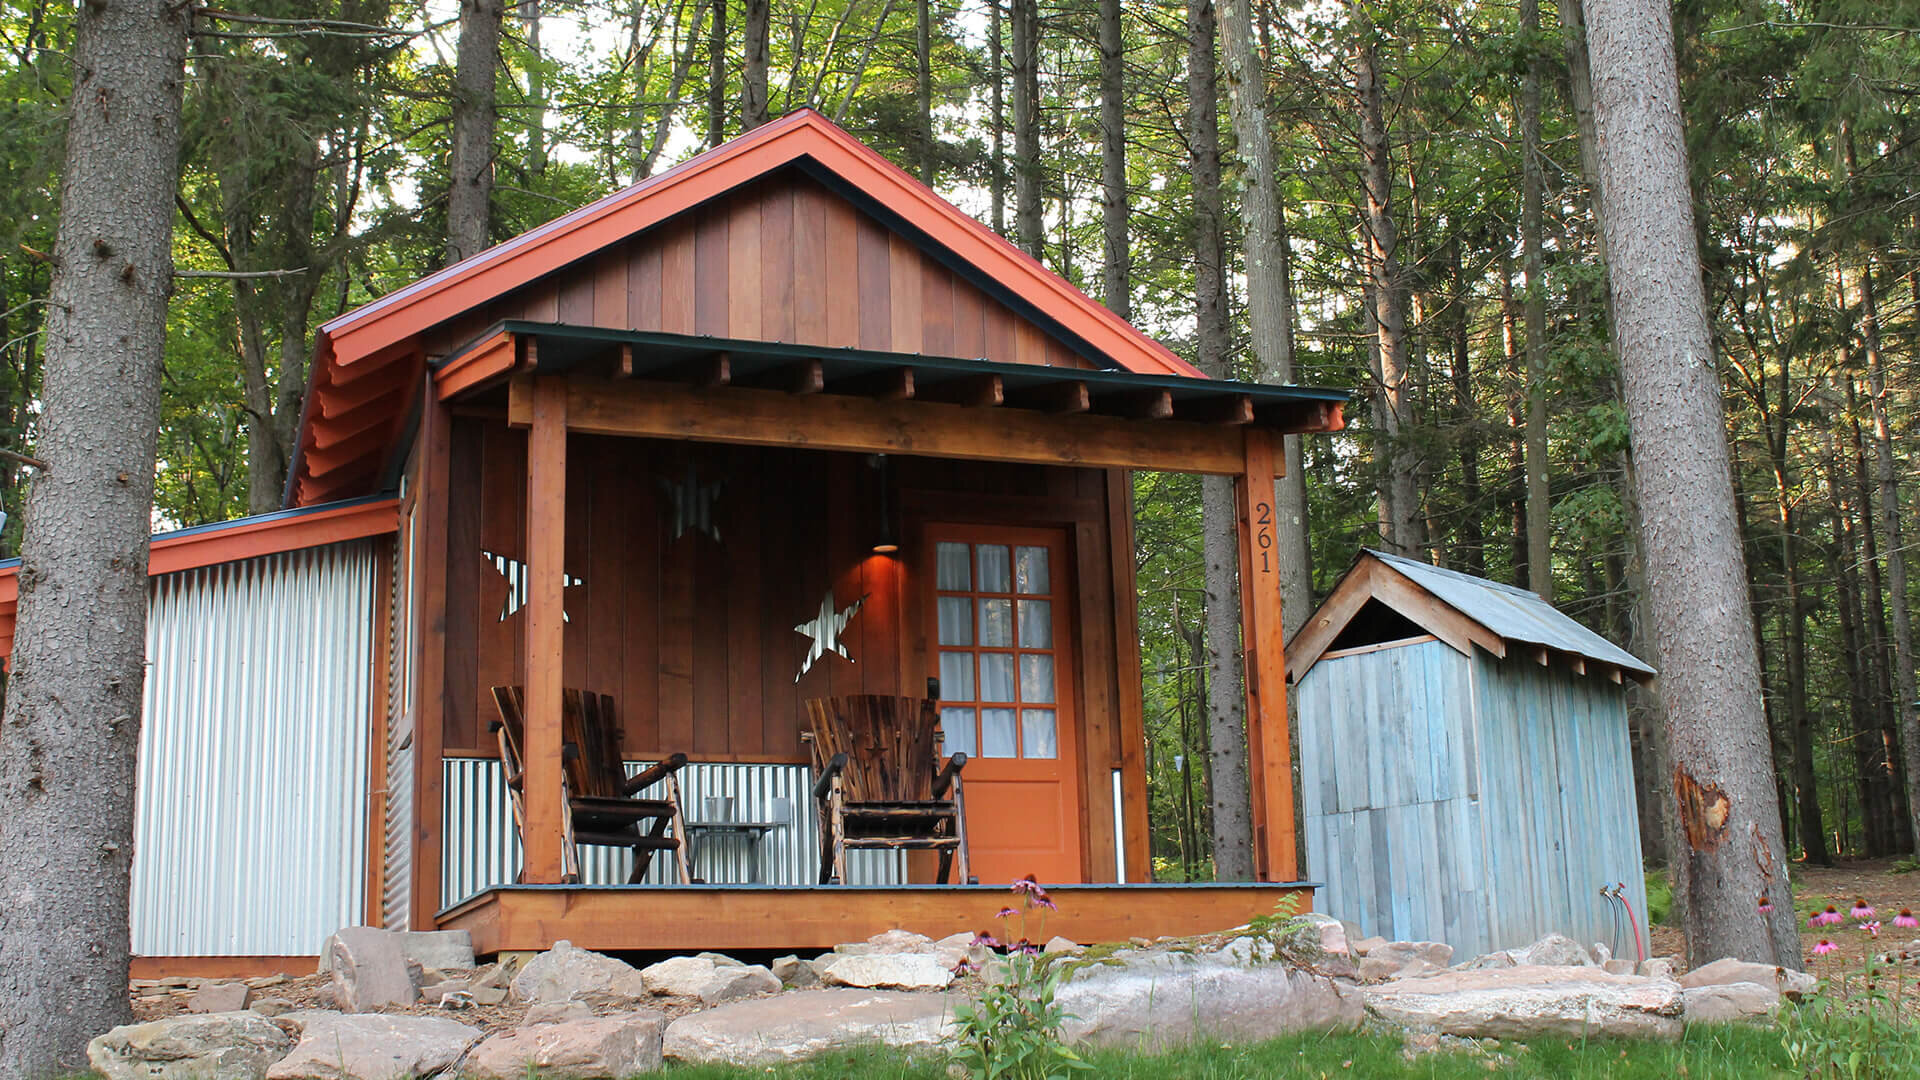  Front porch and outdoor shower for this tiny house are very important to help enjoy the outdoors. 